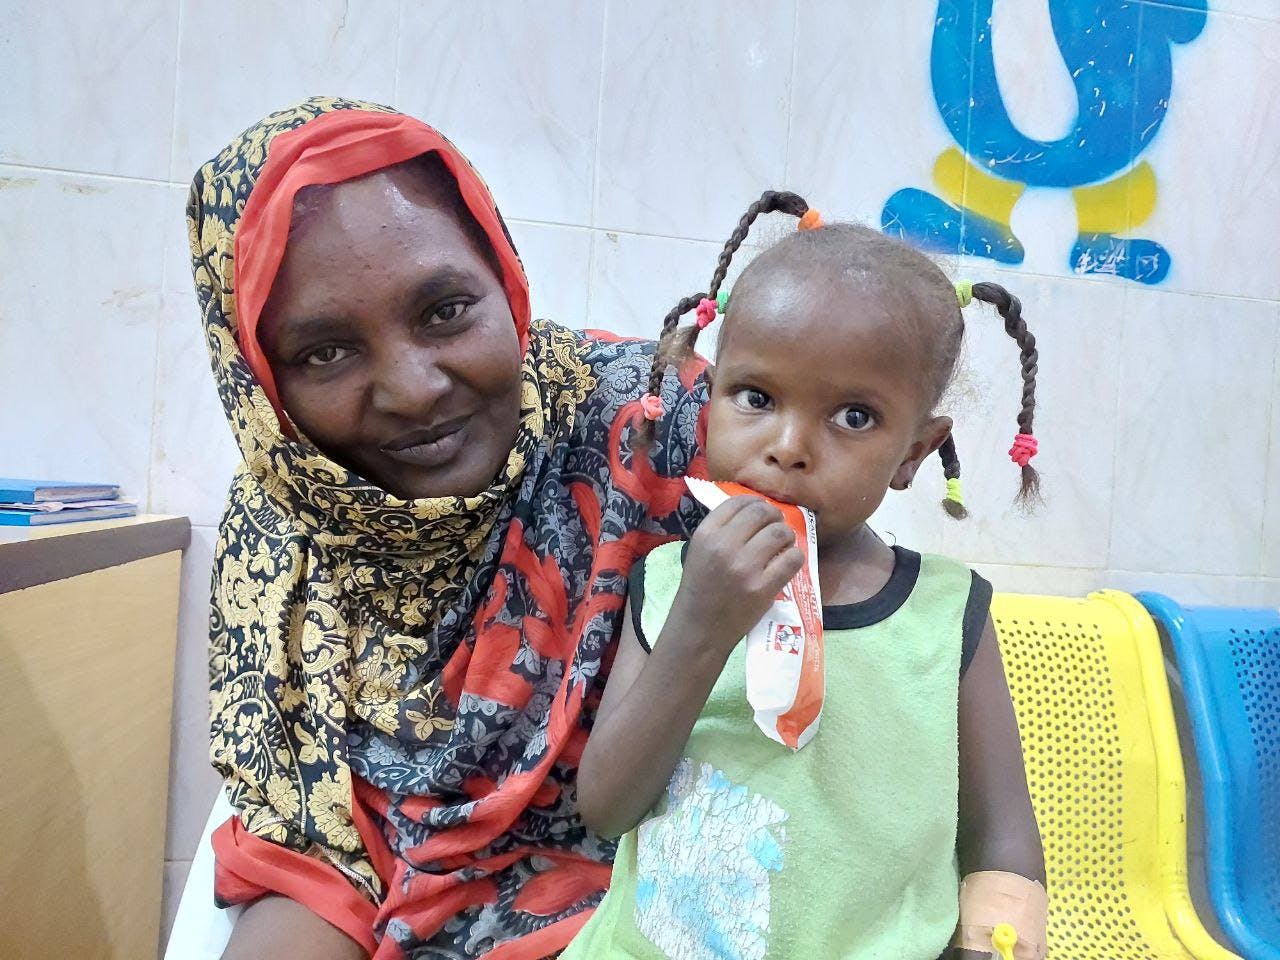 On 1 June, 3-year-old daughter, AlBatoul Taj-Elsir sits on her mother's lap as she eats ready-to-use-therapeutic food (RUTF) in the nutrition ward at Dongola specialized hospital, where she is receiving treatment for severe acute malnutrition.